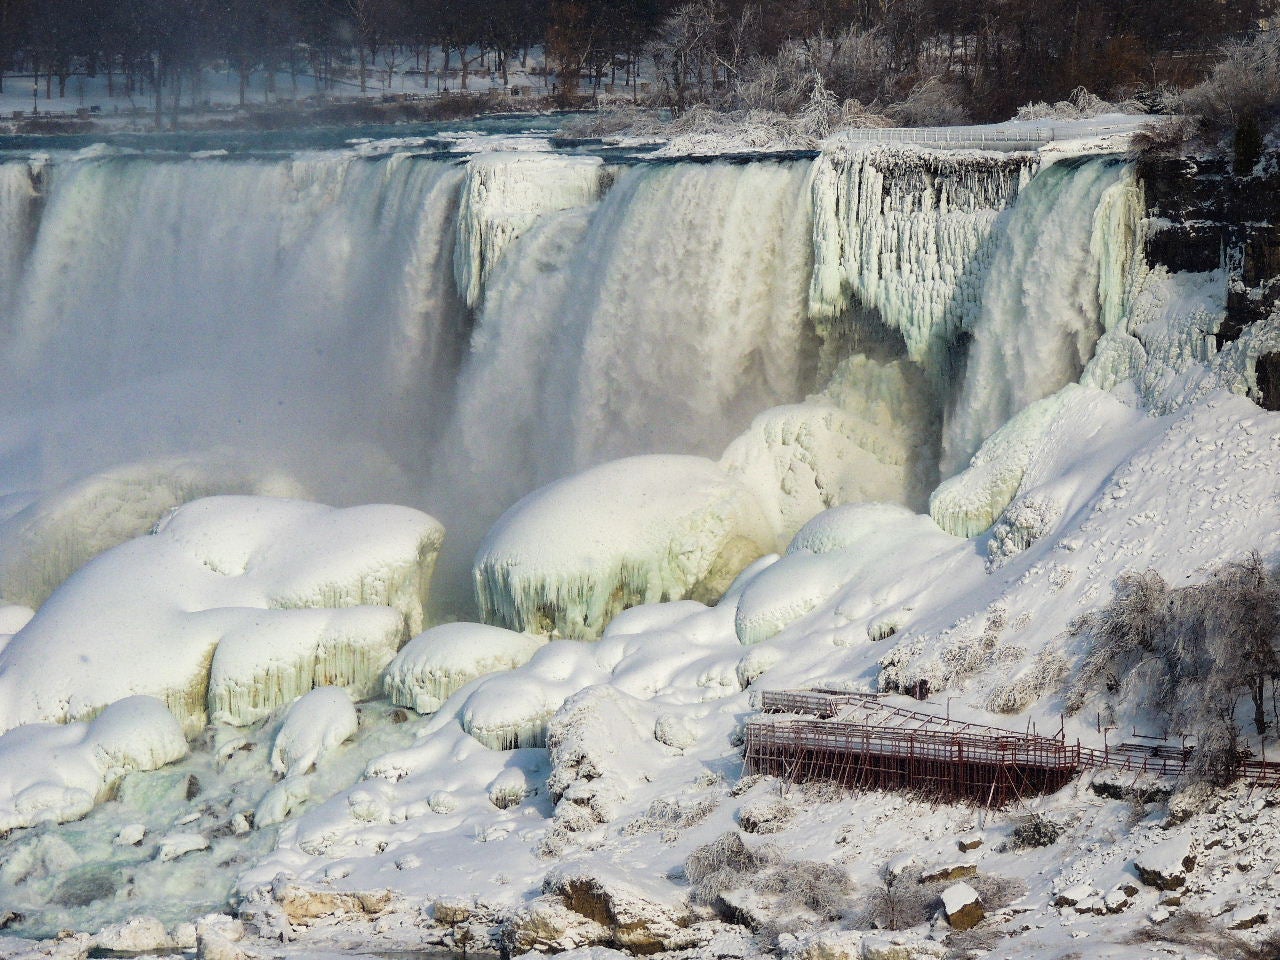 is journey behind the falls open in winter